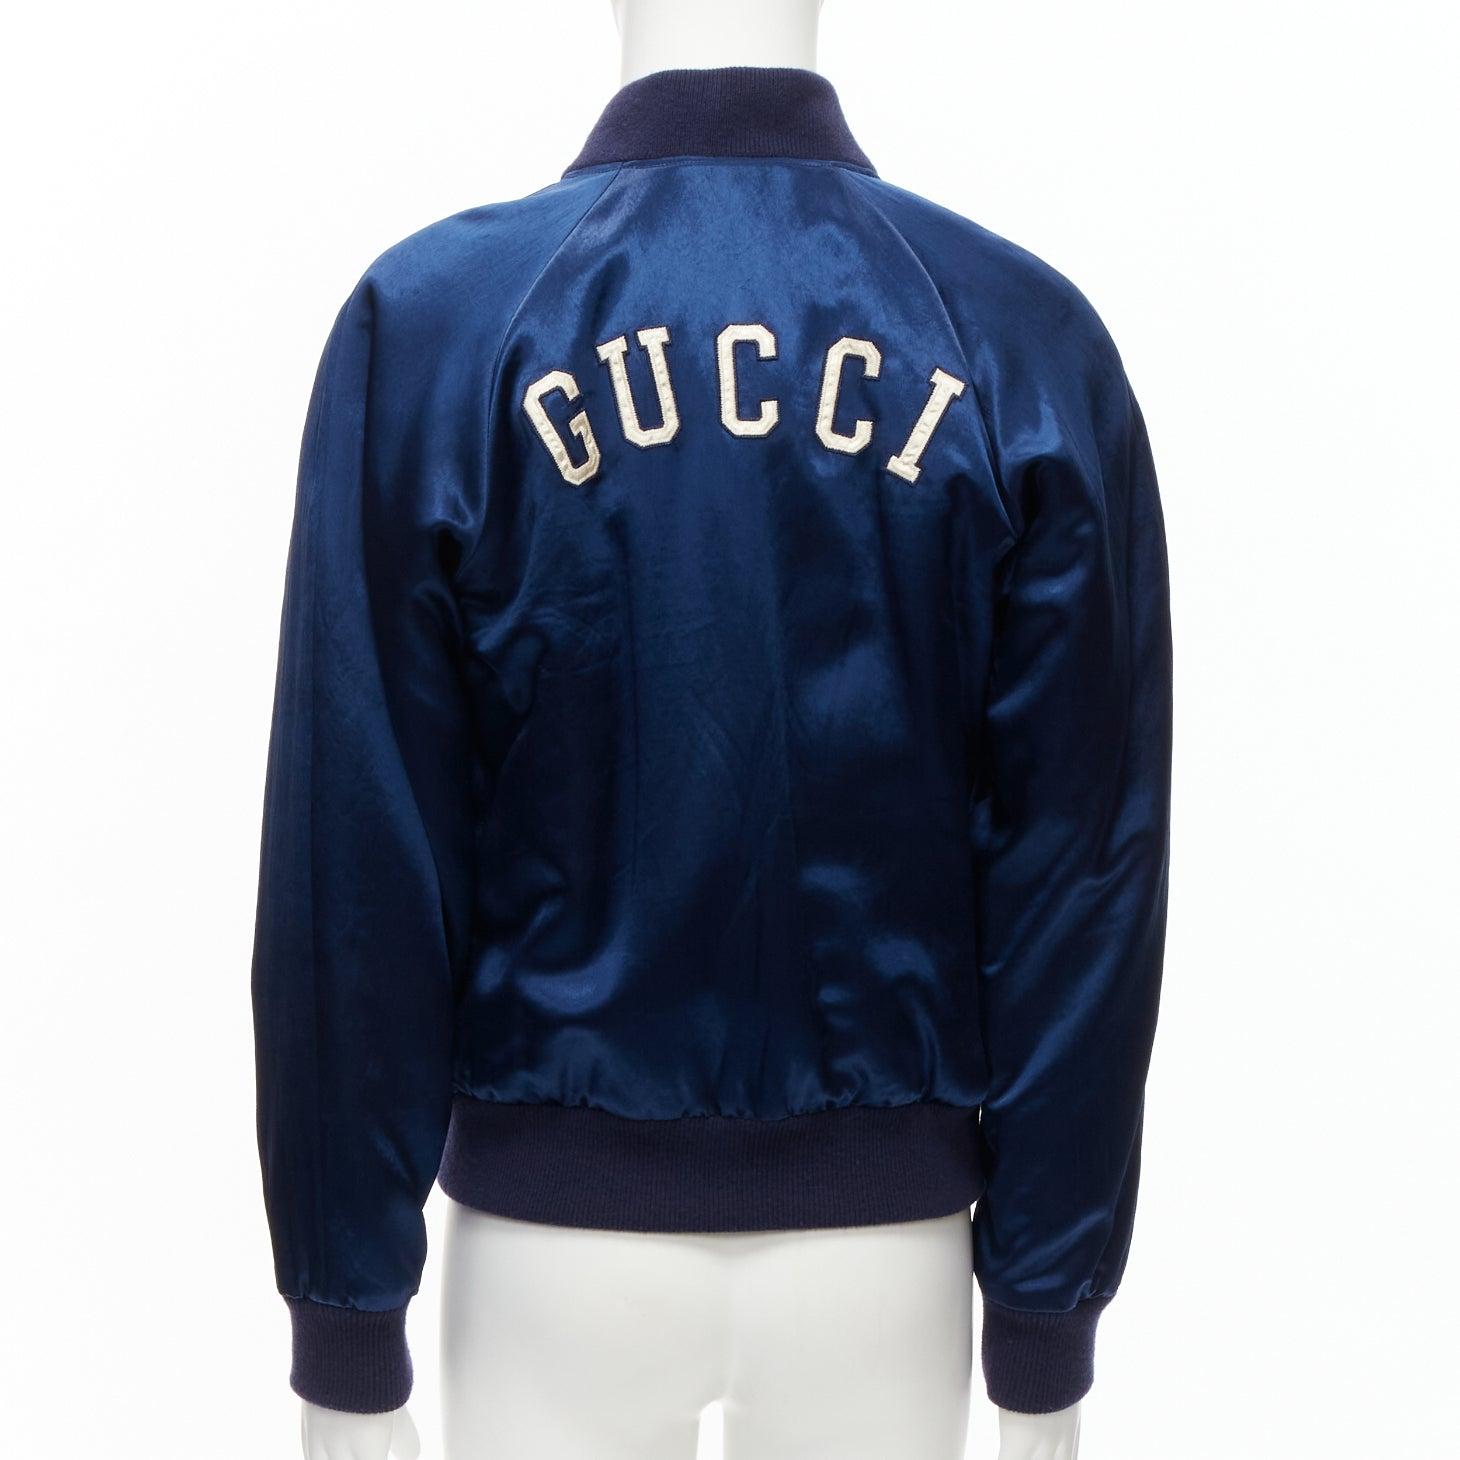 GUCCI Alessandro Michele 2018 NY Yankees embroidery satin baseball jacket IT48 M
Reference: JSLE/A00007
Brand: Gucci
Designer: Alessandro Michele
Collection: 2018 Yankees
Material: Acetate
Color: Navy, Off White
Pattern: Solid
Closure: Snap